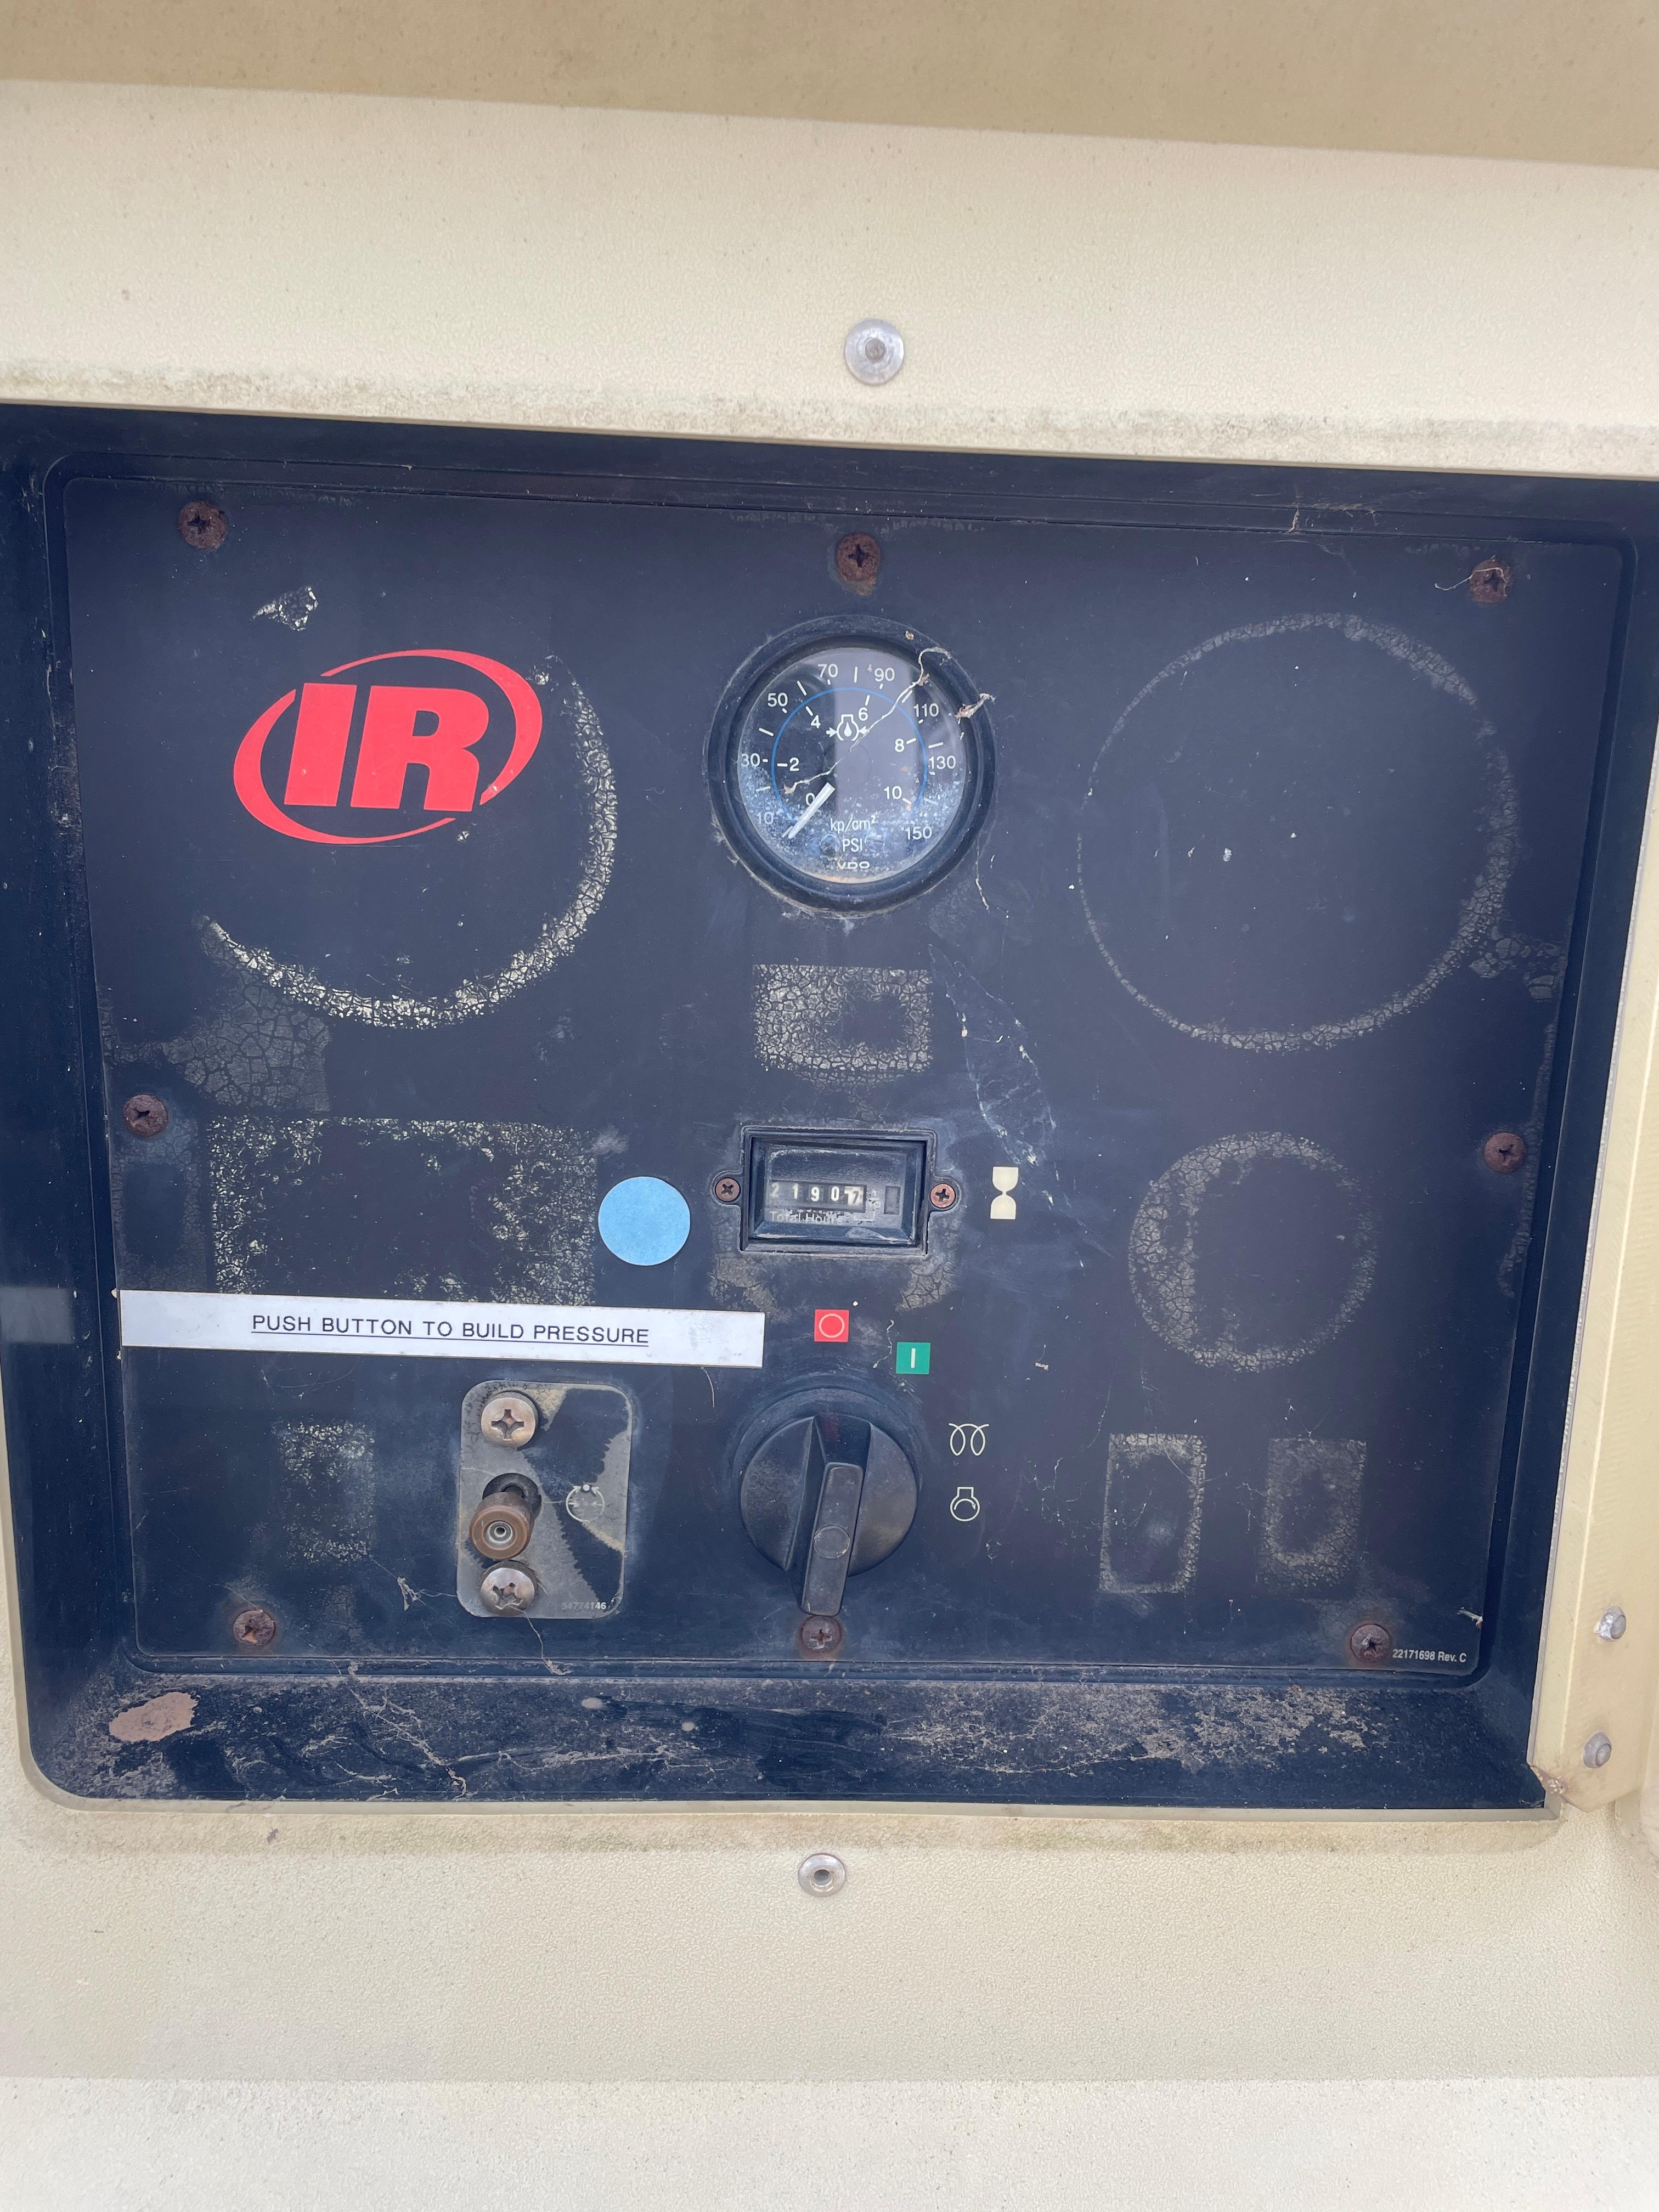 2006 Ingersoll Rand 185 Towable Air Compressor